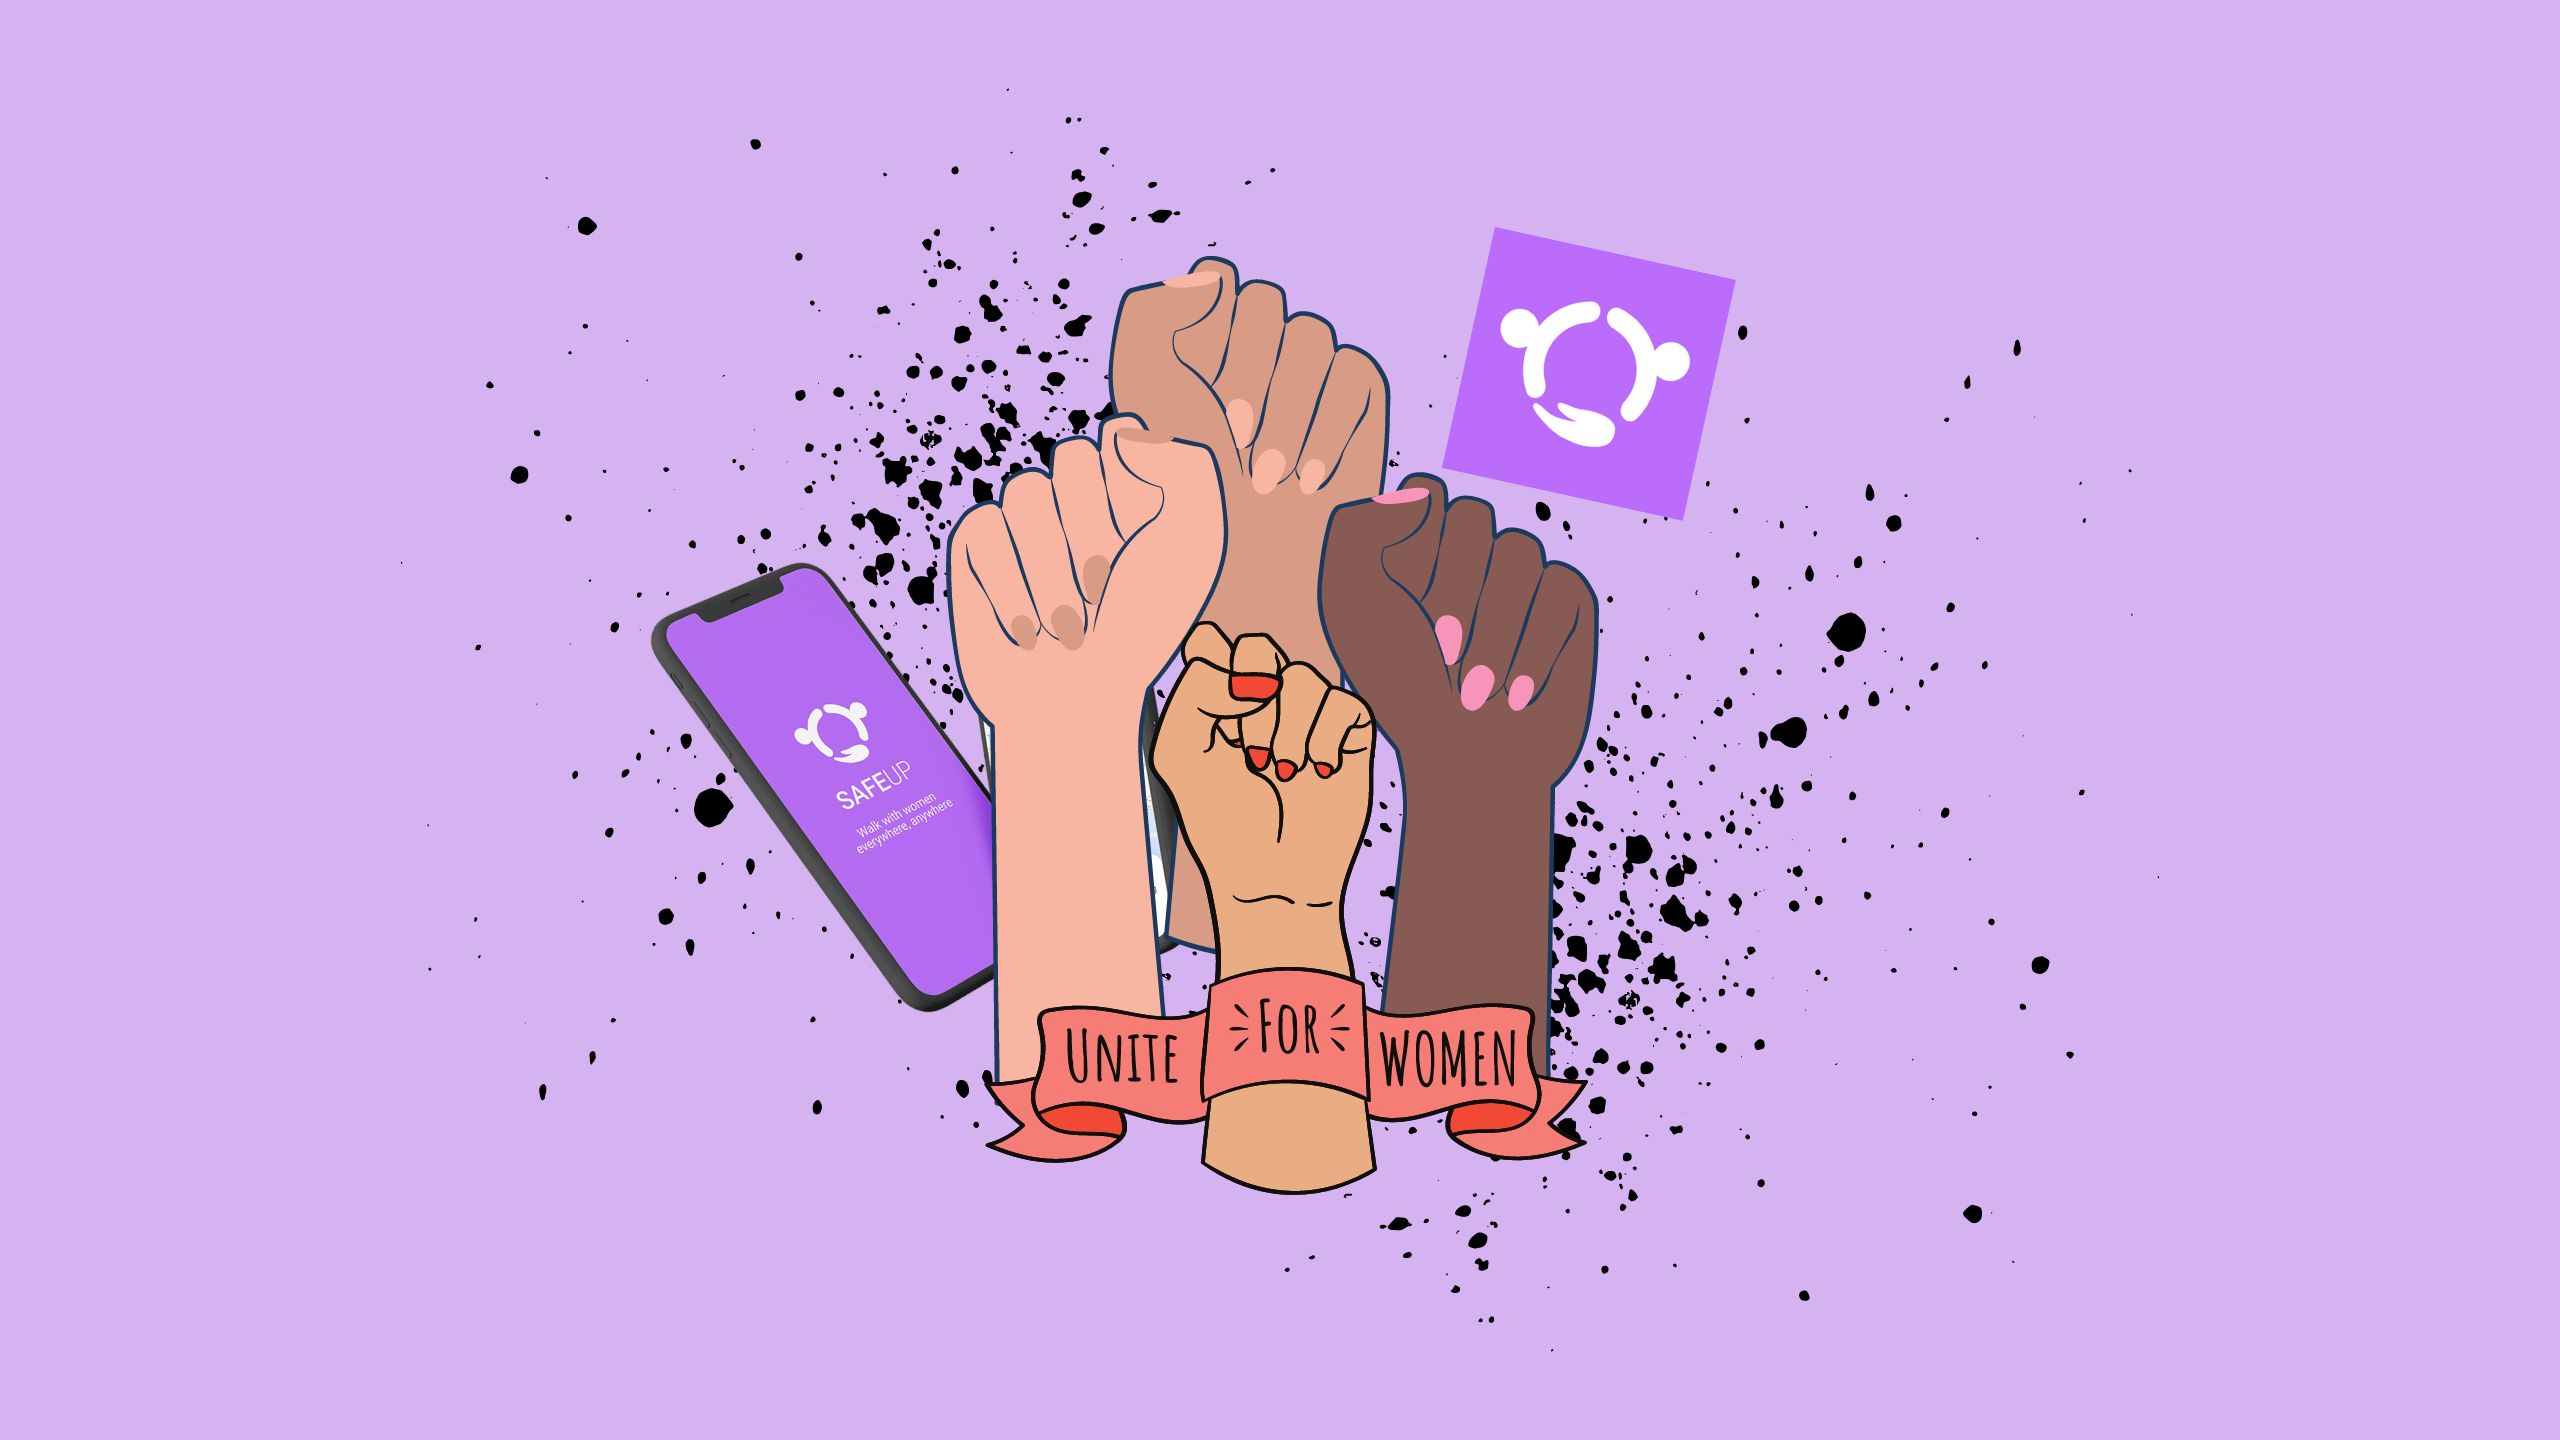 SafeUp, a new app that makes women feel safer